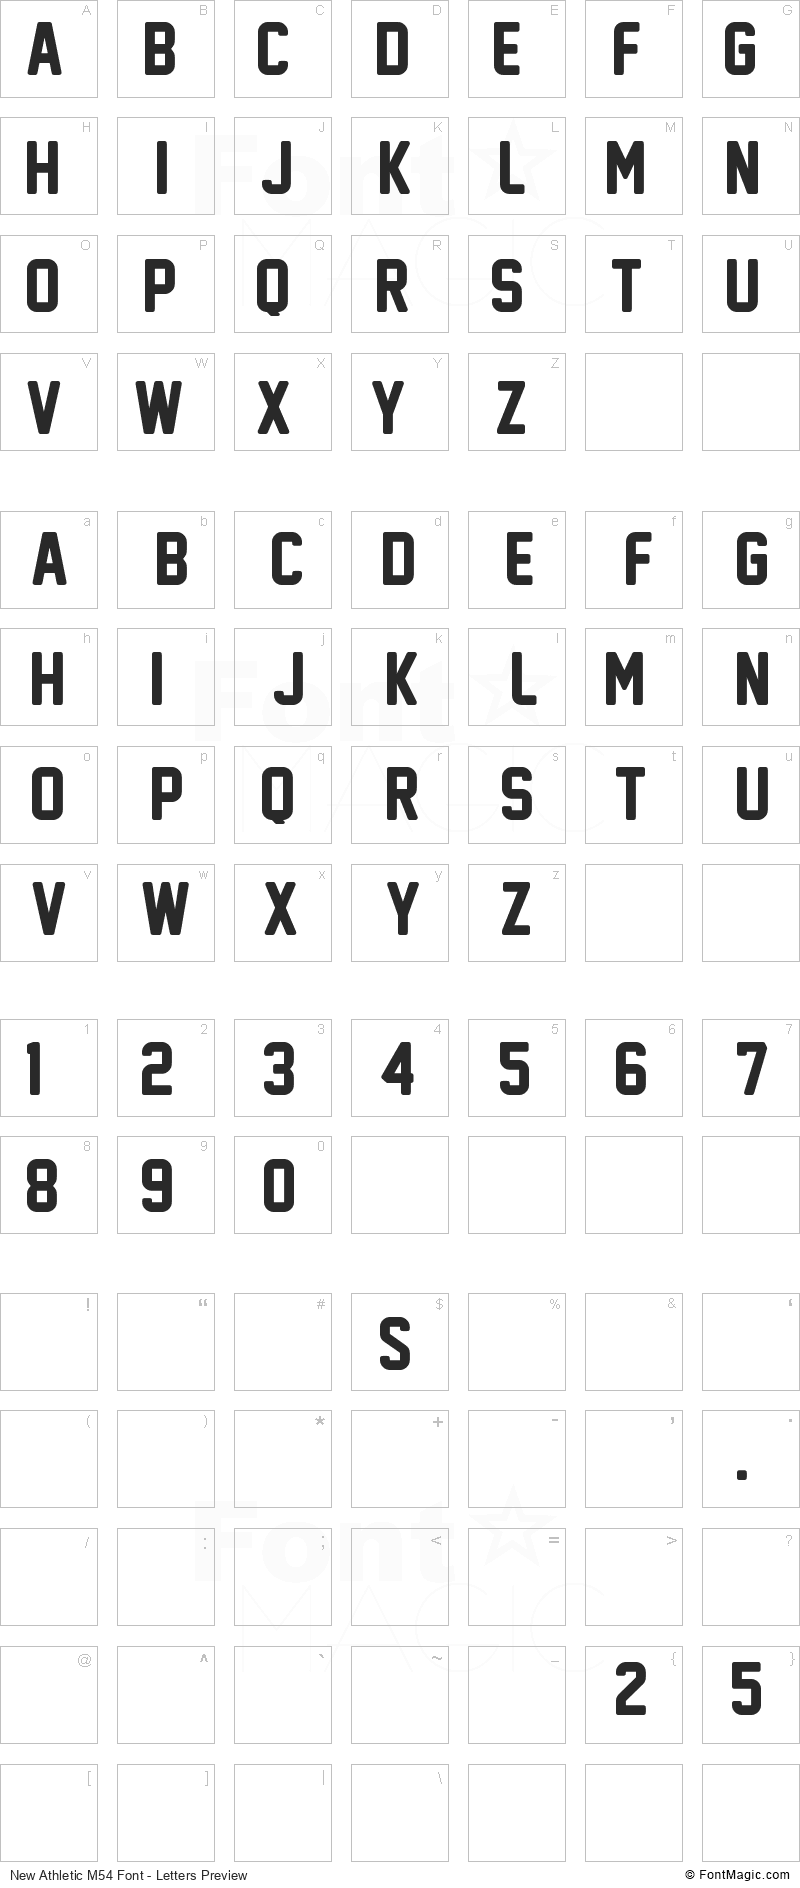 New Athletic M54 Font - All Latters Preview Chart